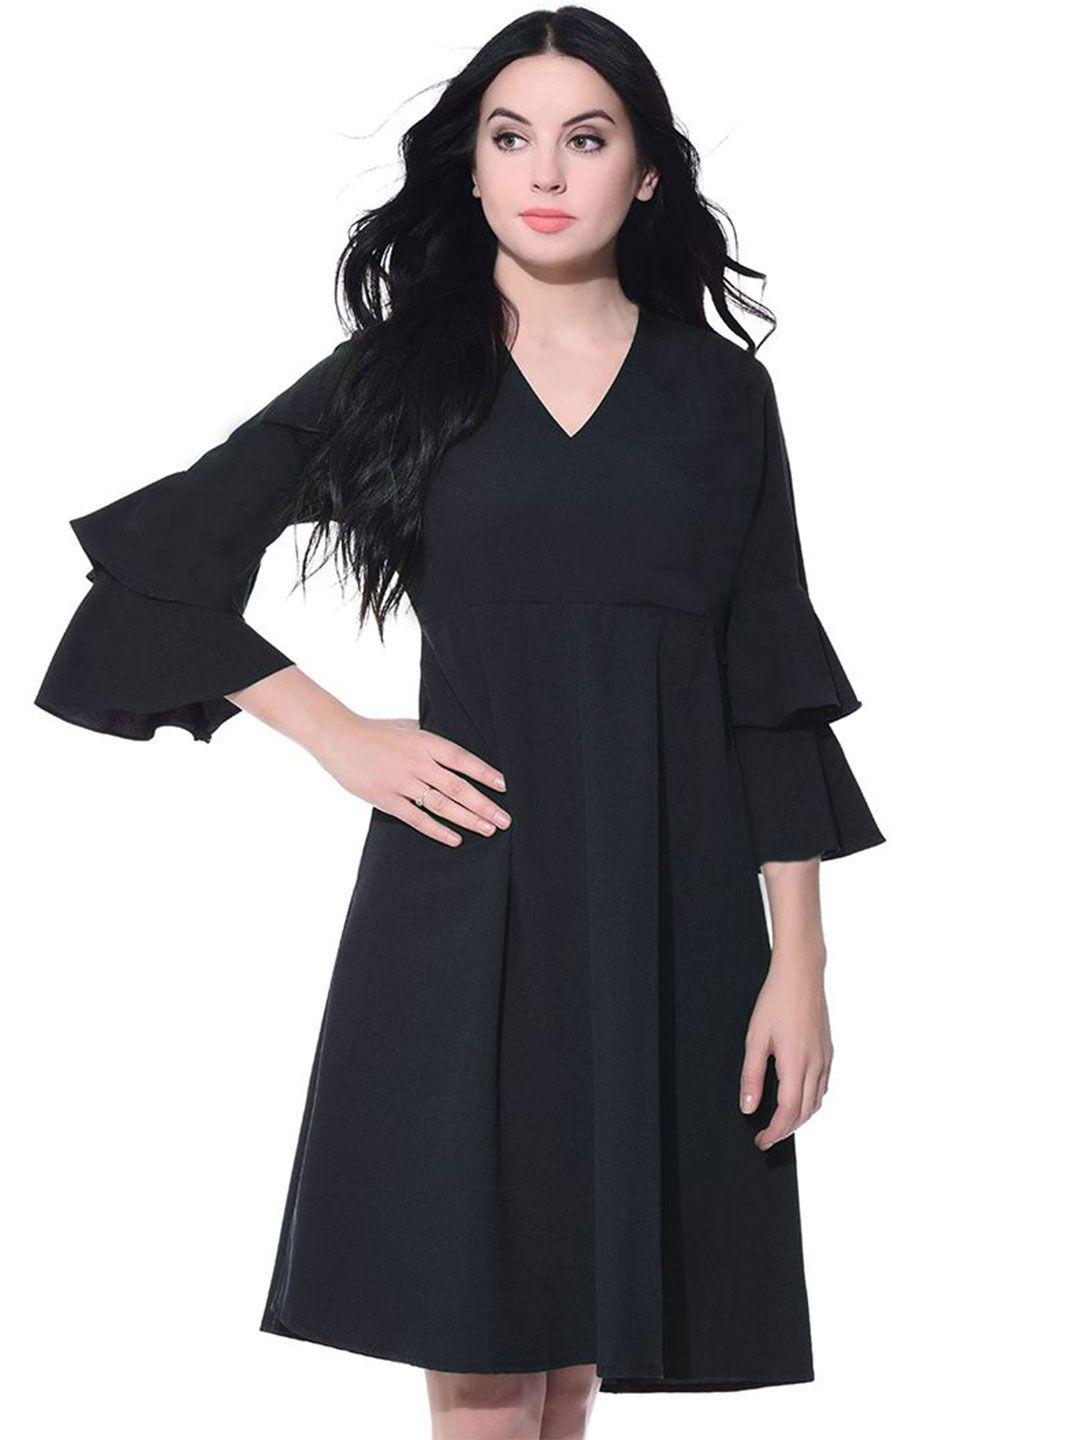 uptownie lite bell sleeves fit & flare dress with belt